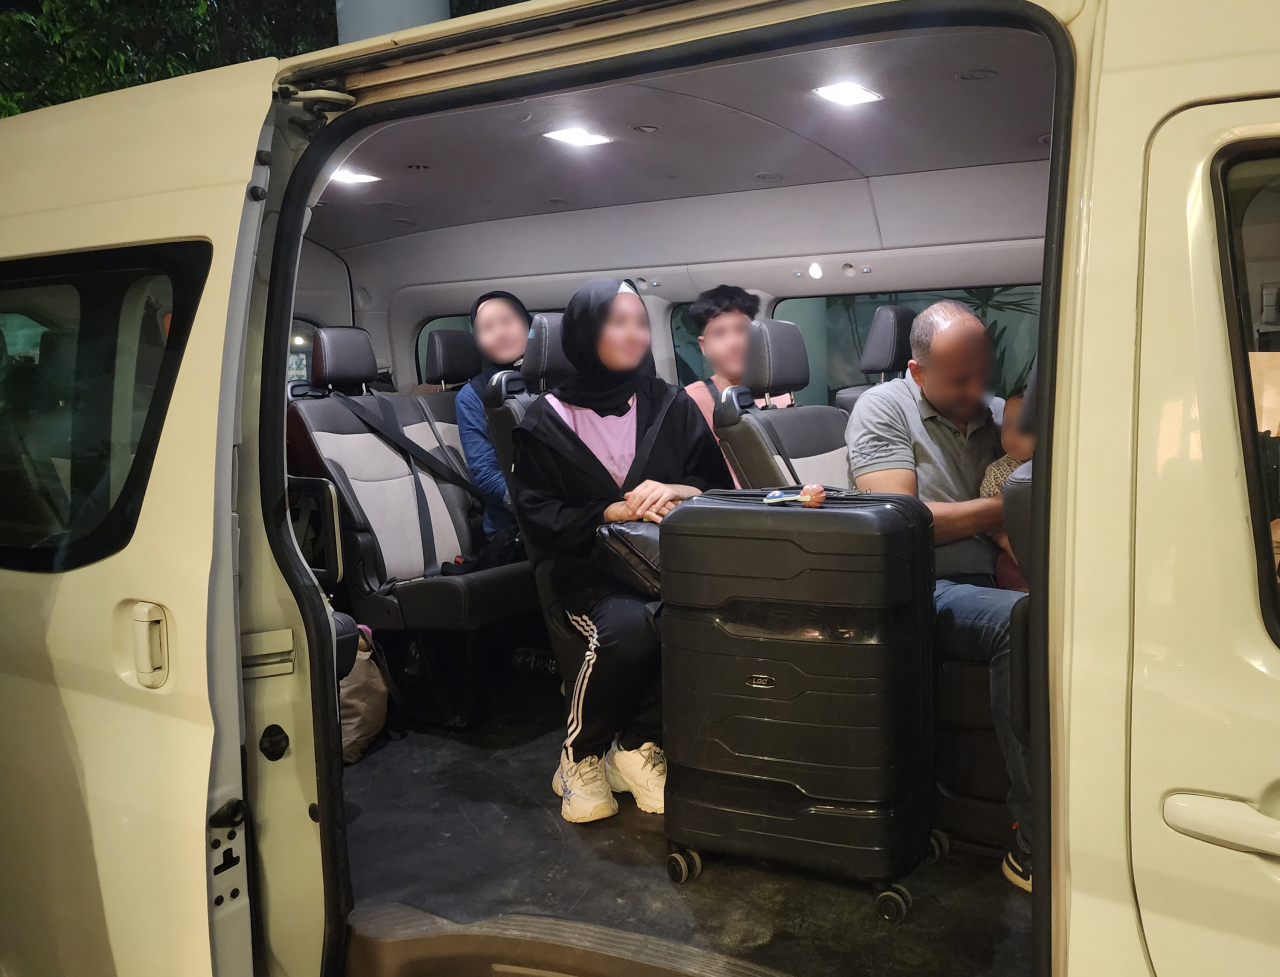 A South Korean family of five members rides in a vehicle to head to a lodging facility in Cairo on Thursday, after crossing into Egypt through the Rafah border from Gaza, amid the armed conflict between Israel and the Islamic militant Hamas group. (Yonhap)